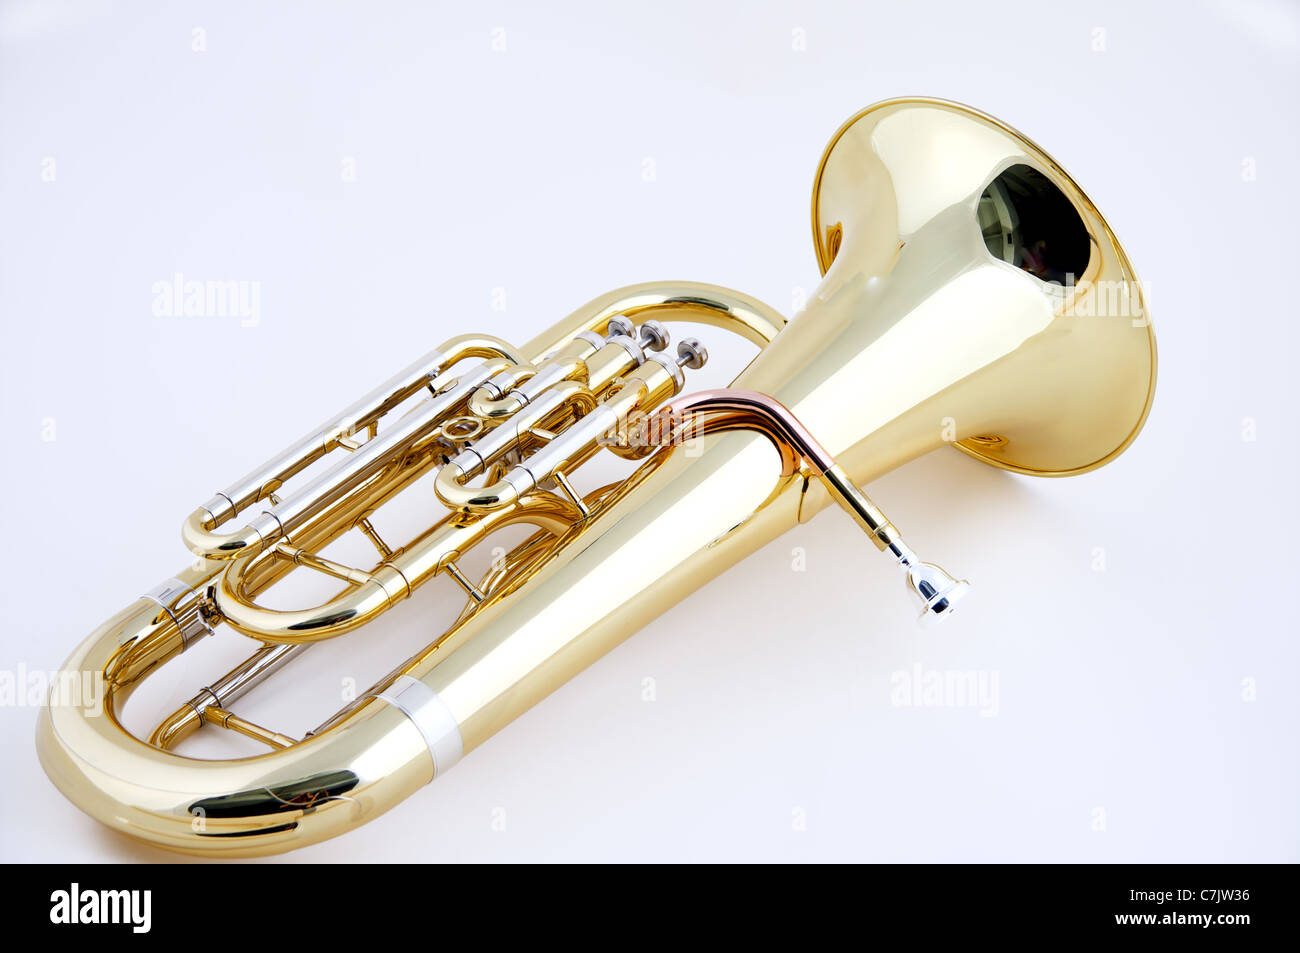 A complete gold brass tuba or euphonium isolated against a high key white background in the horizontal format with copy space. Stock Photo